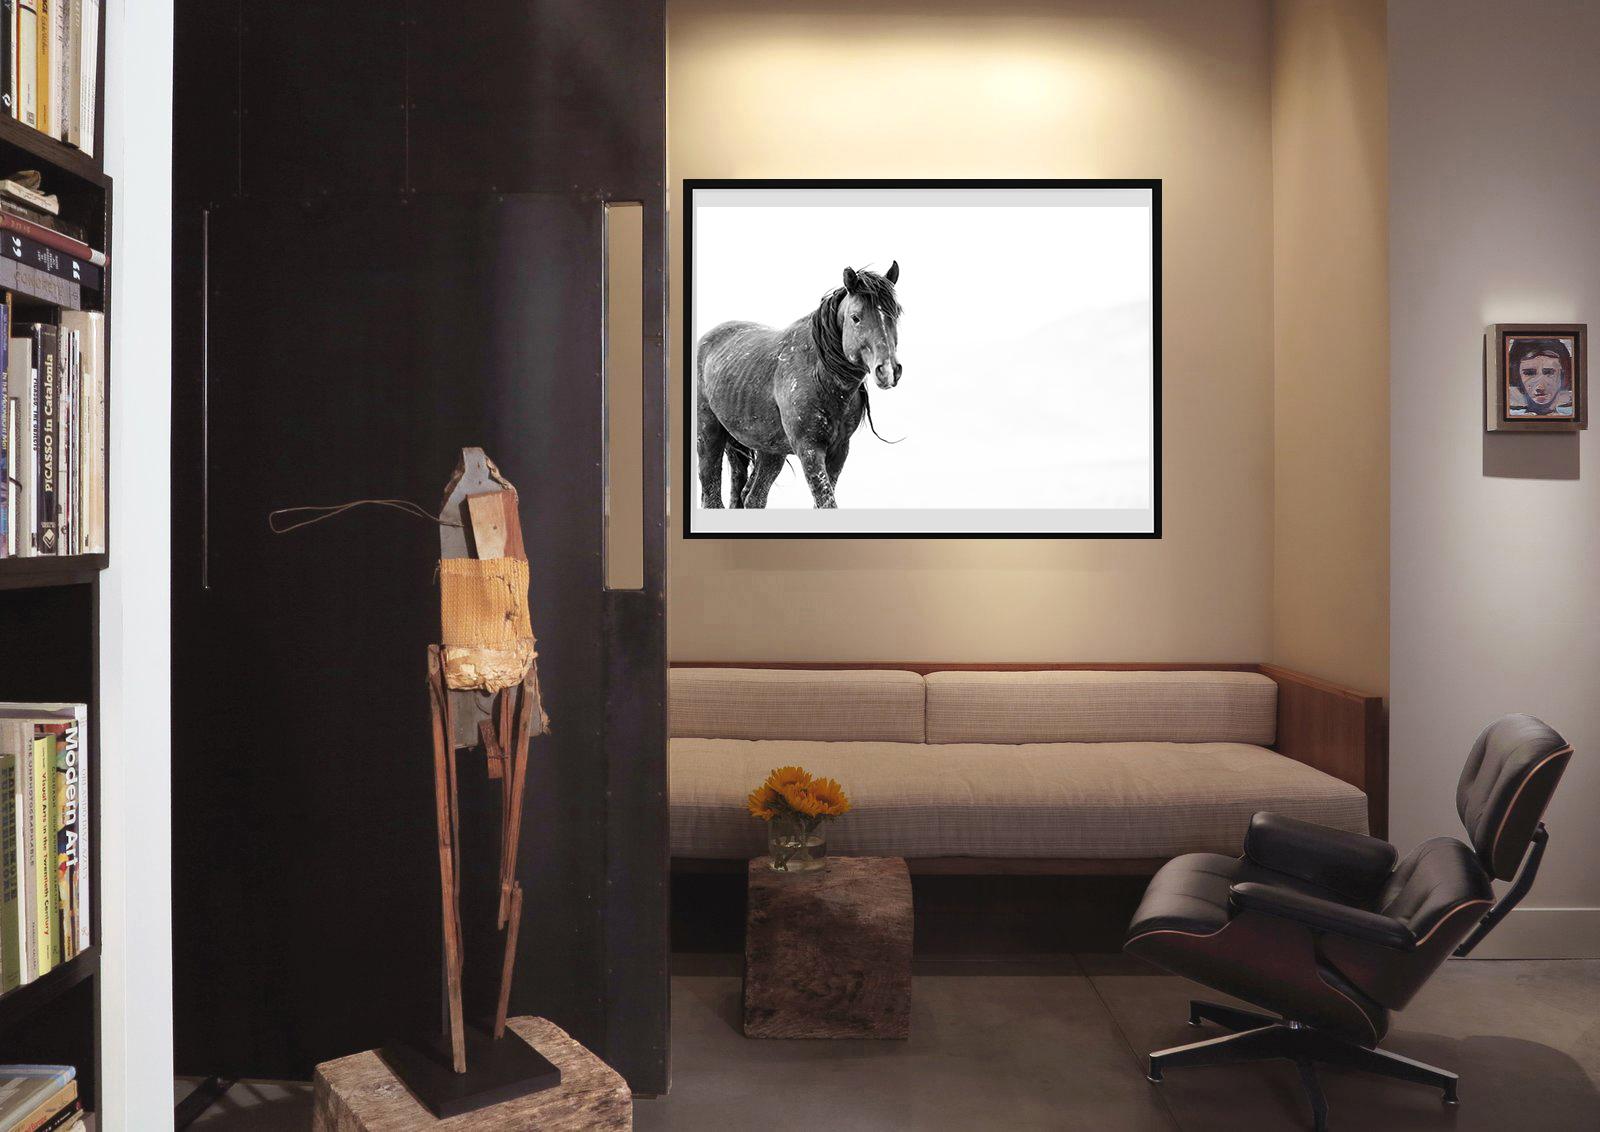 This is a contemporary photograph of a North American Wild Mustang
36x48 Unsigned print
Archival pigment paper
Framing available. Inquire for rates. 


Shane Russeck has built a reputation for capturing America's landscapes, cultures and endangered